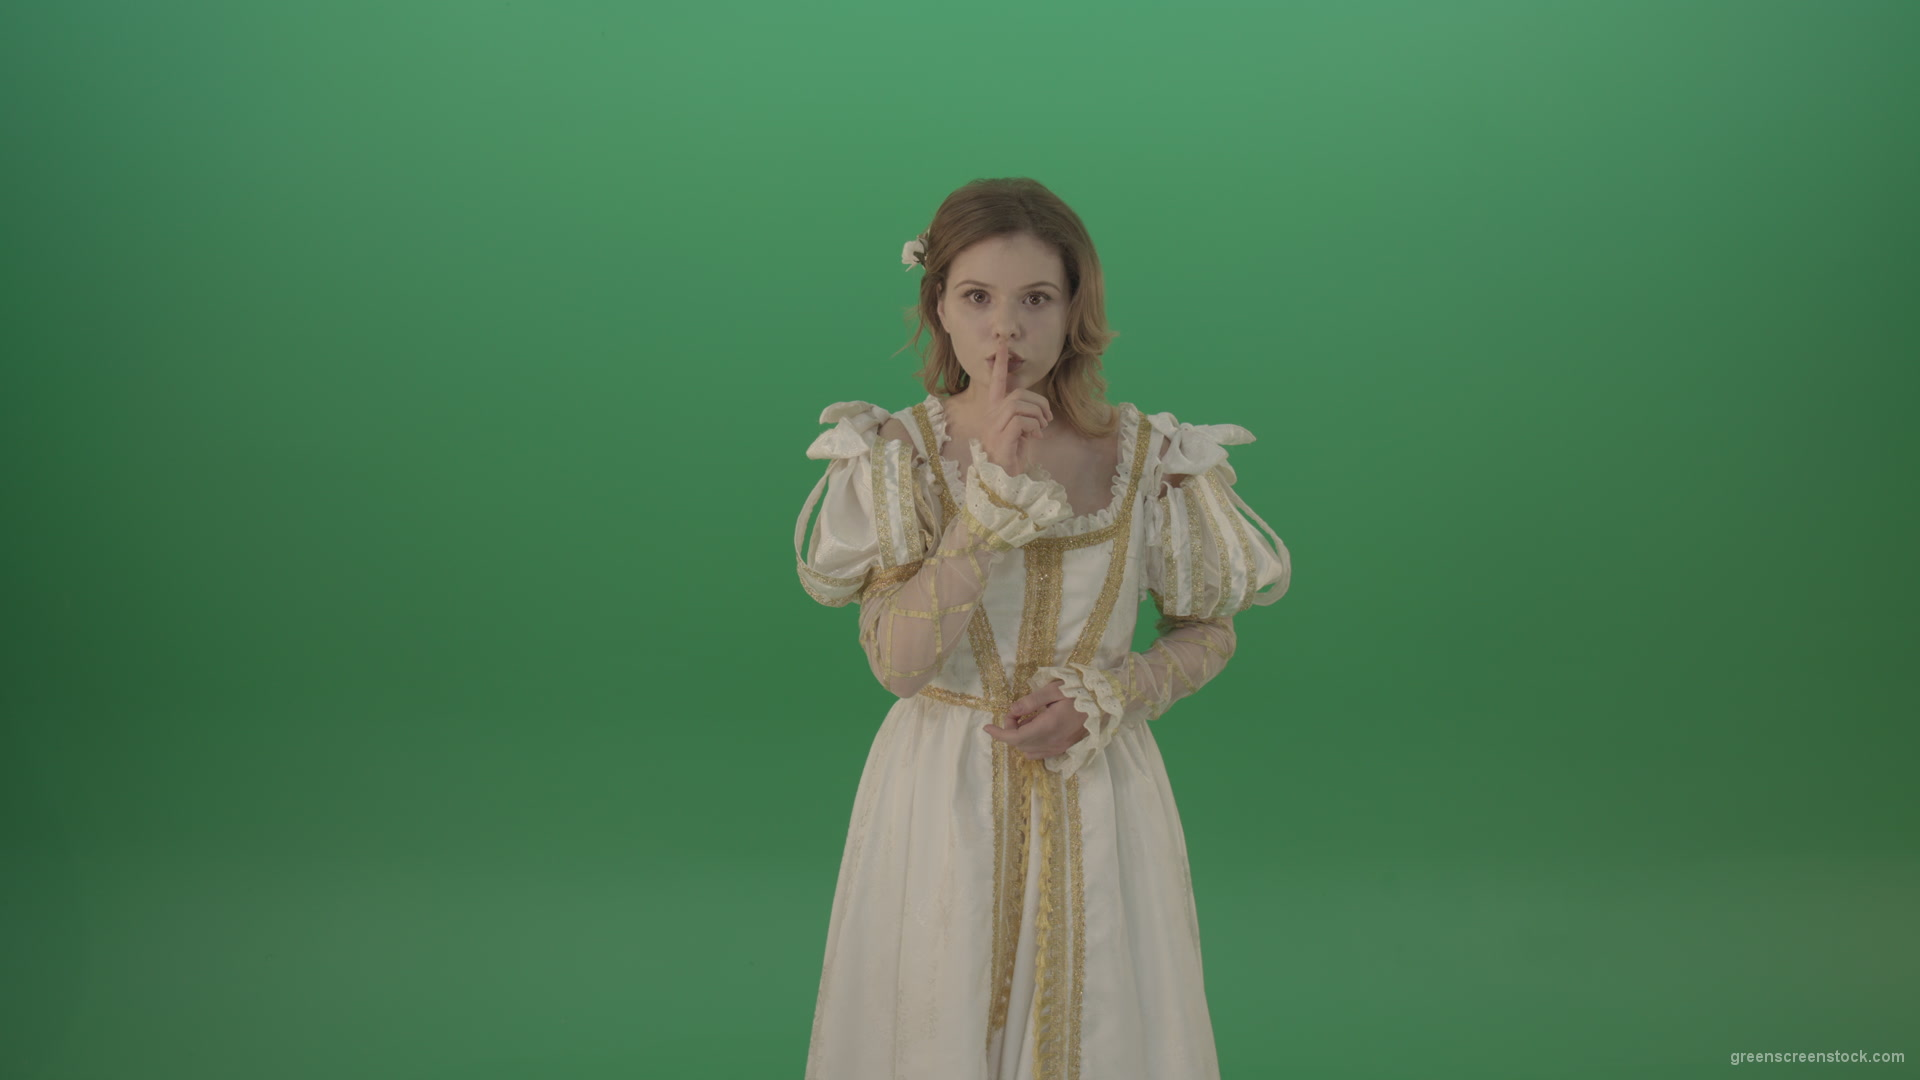 Girl-asks-to-be-quieter-in-a-white-dress-isolated-on-green-screen_006 Green Screen Stock